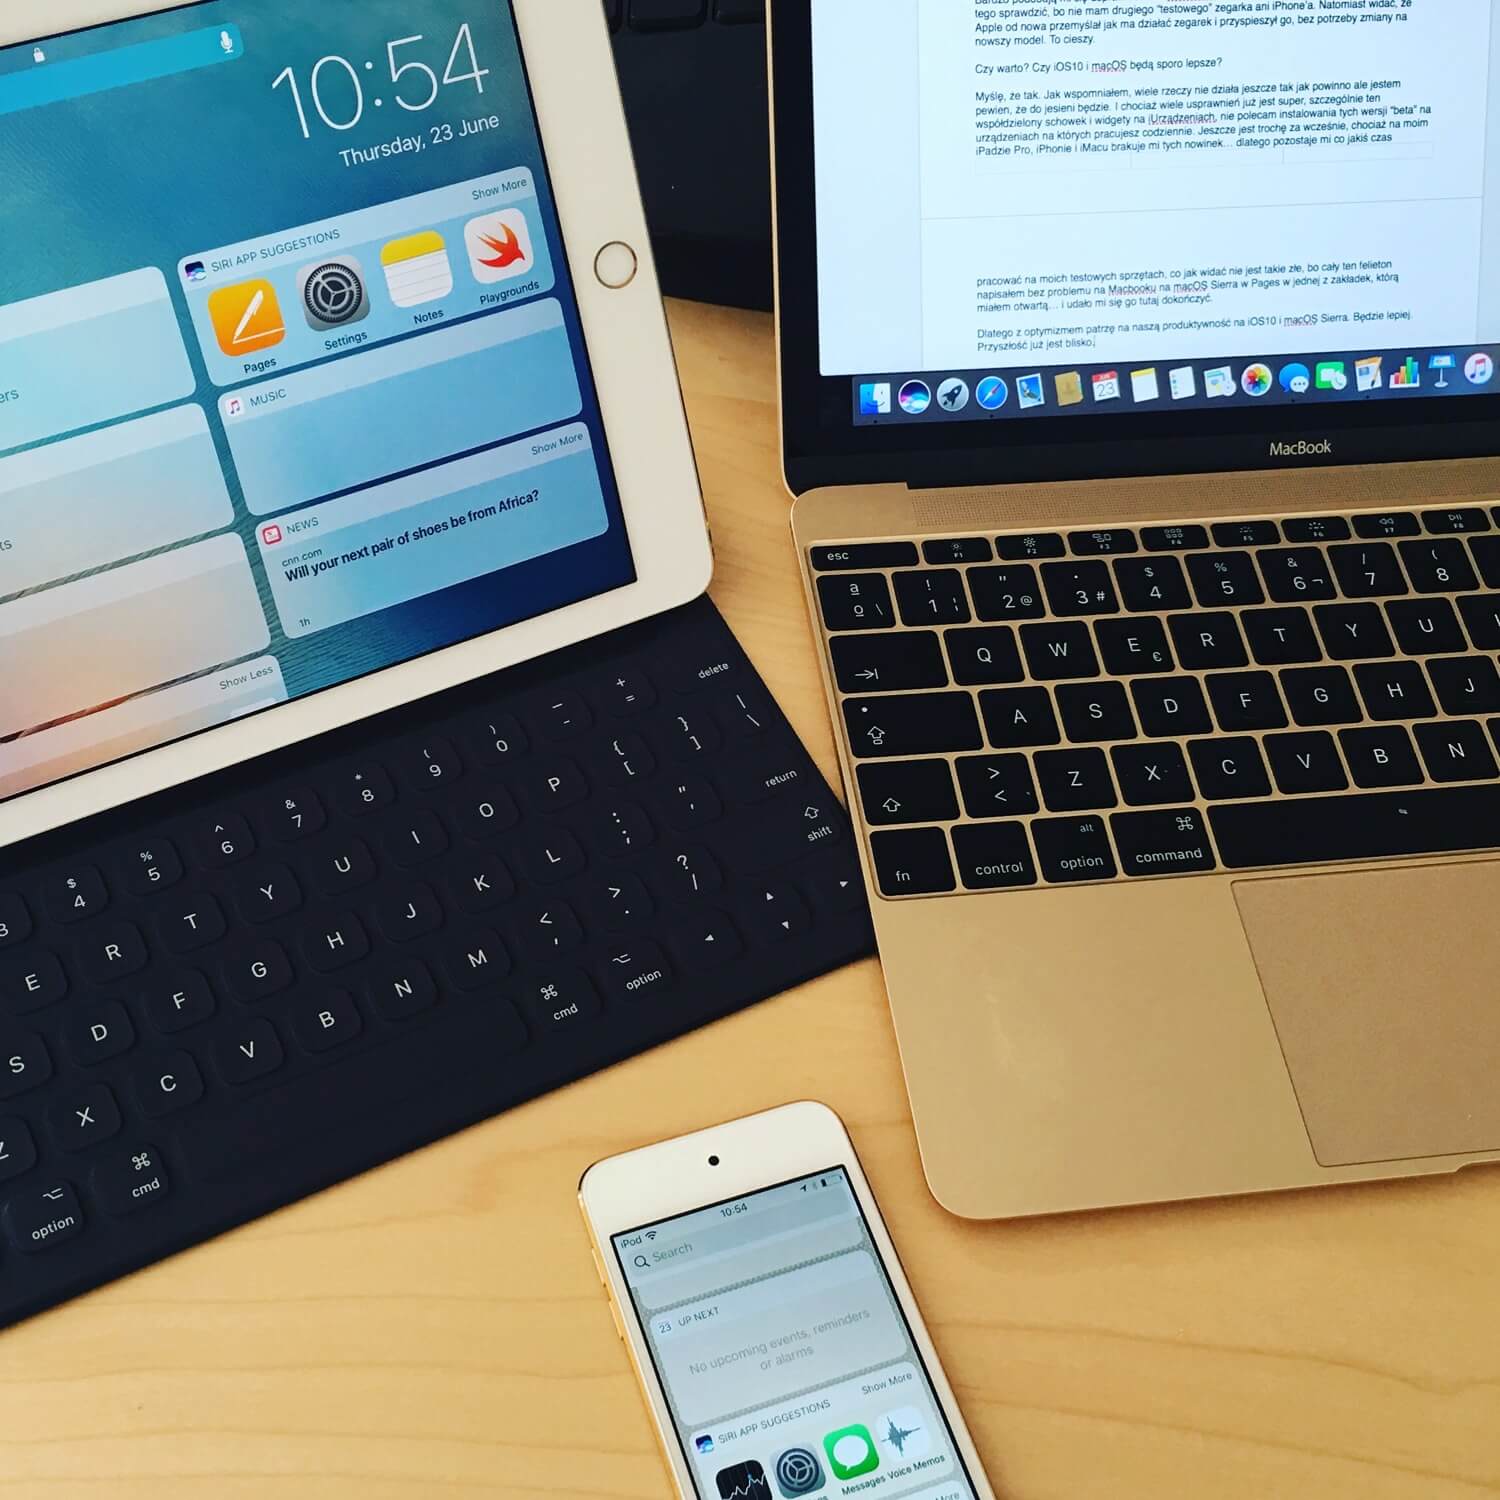 New features in iOS10 and macOS Sierra that will help boost your productivity